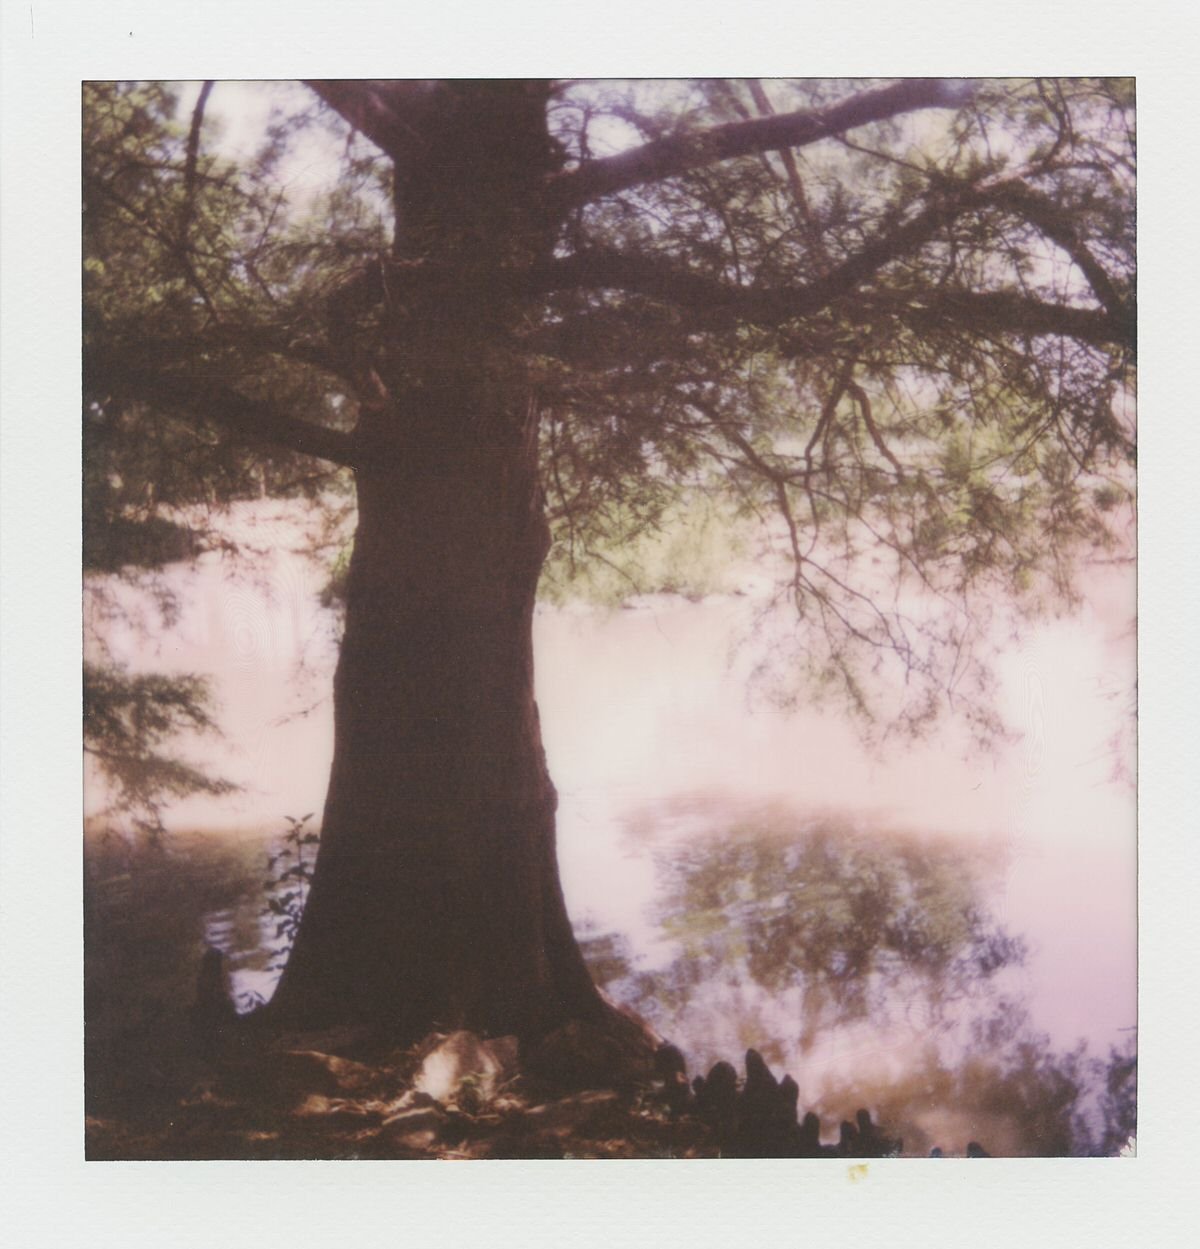 Polaroid of a tree with most interesting little stumps off to the side.